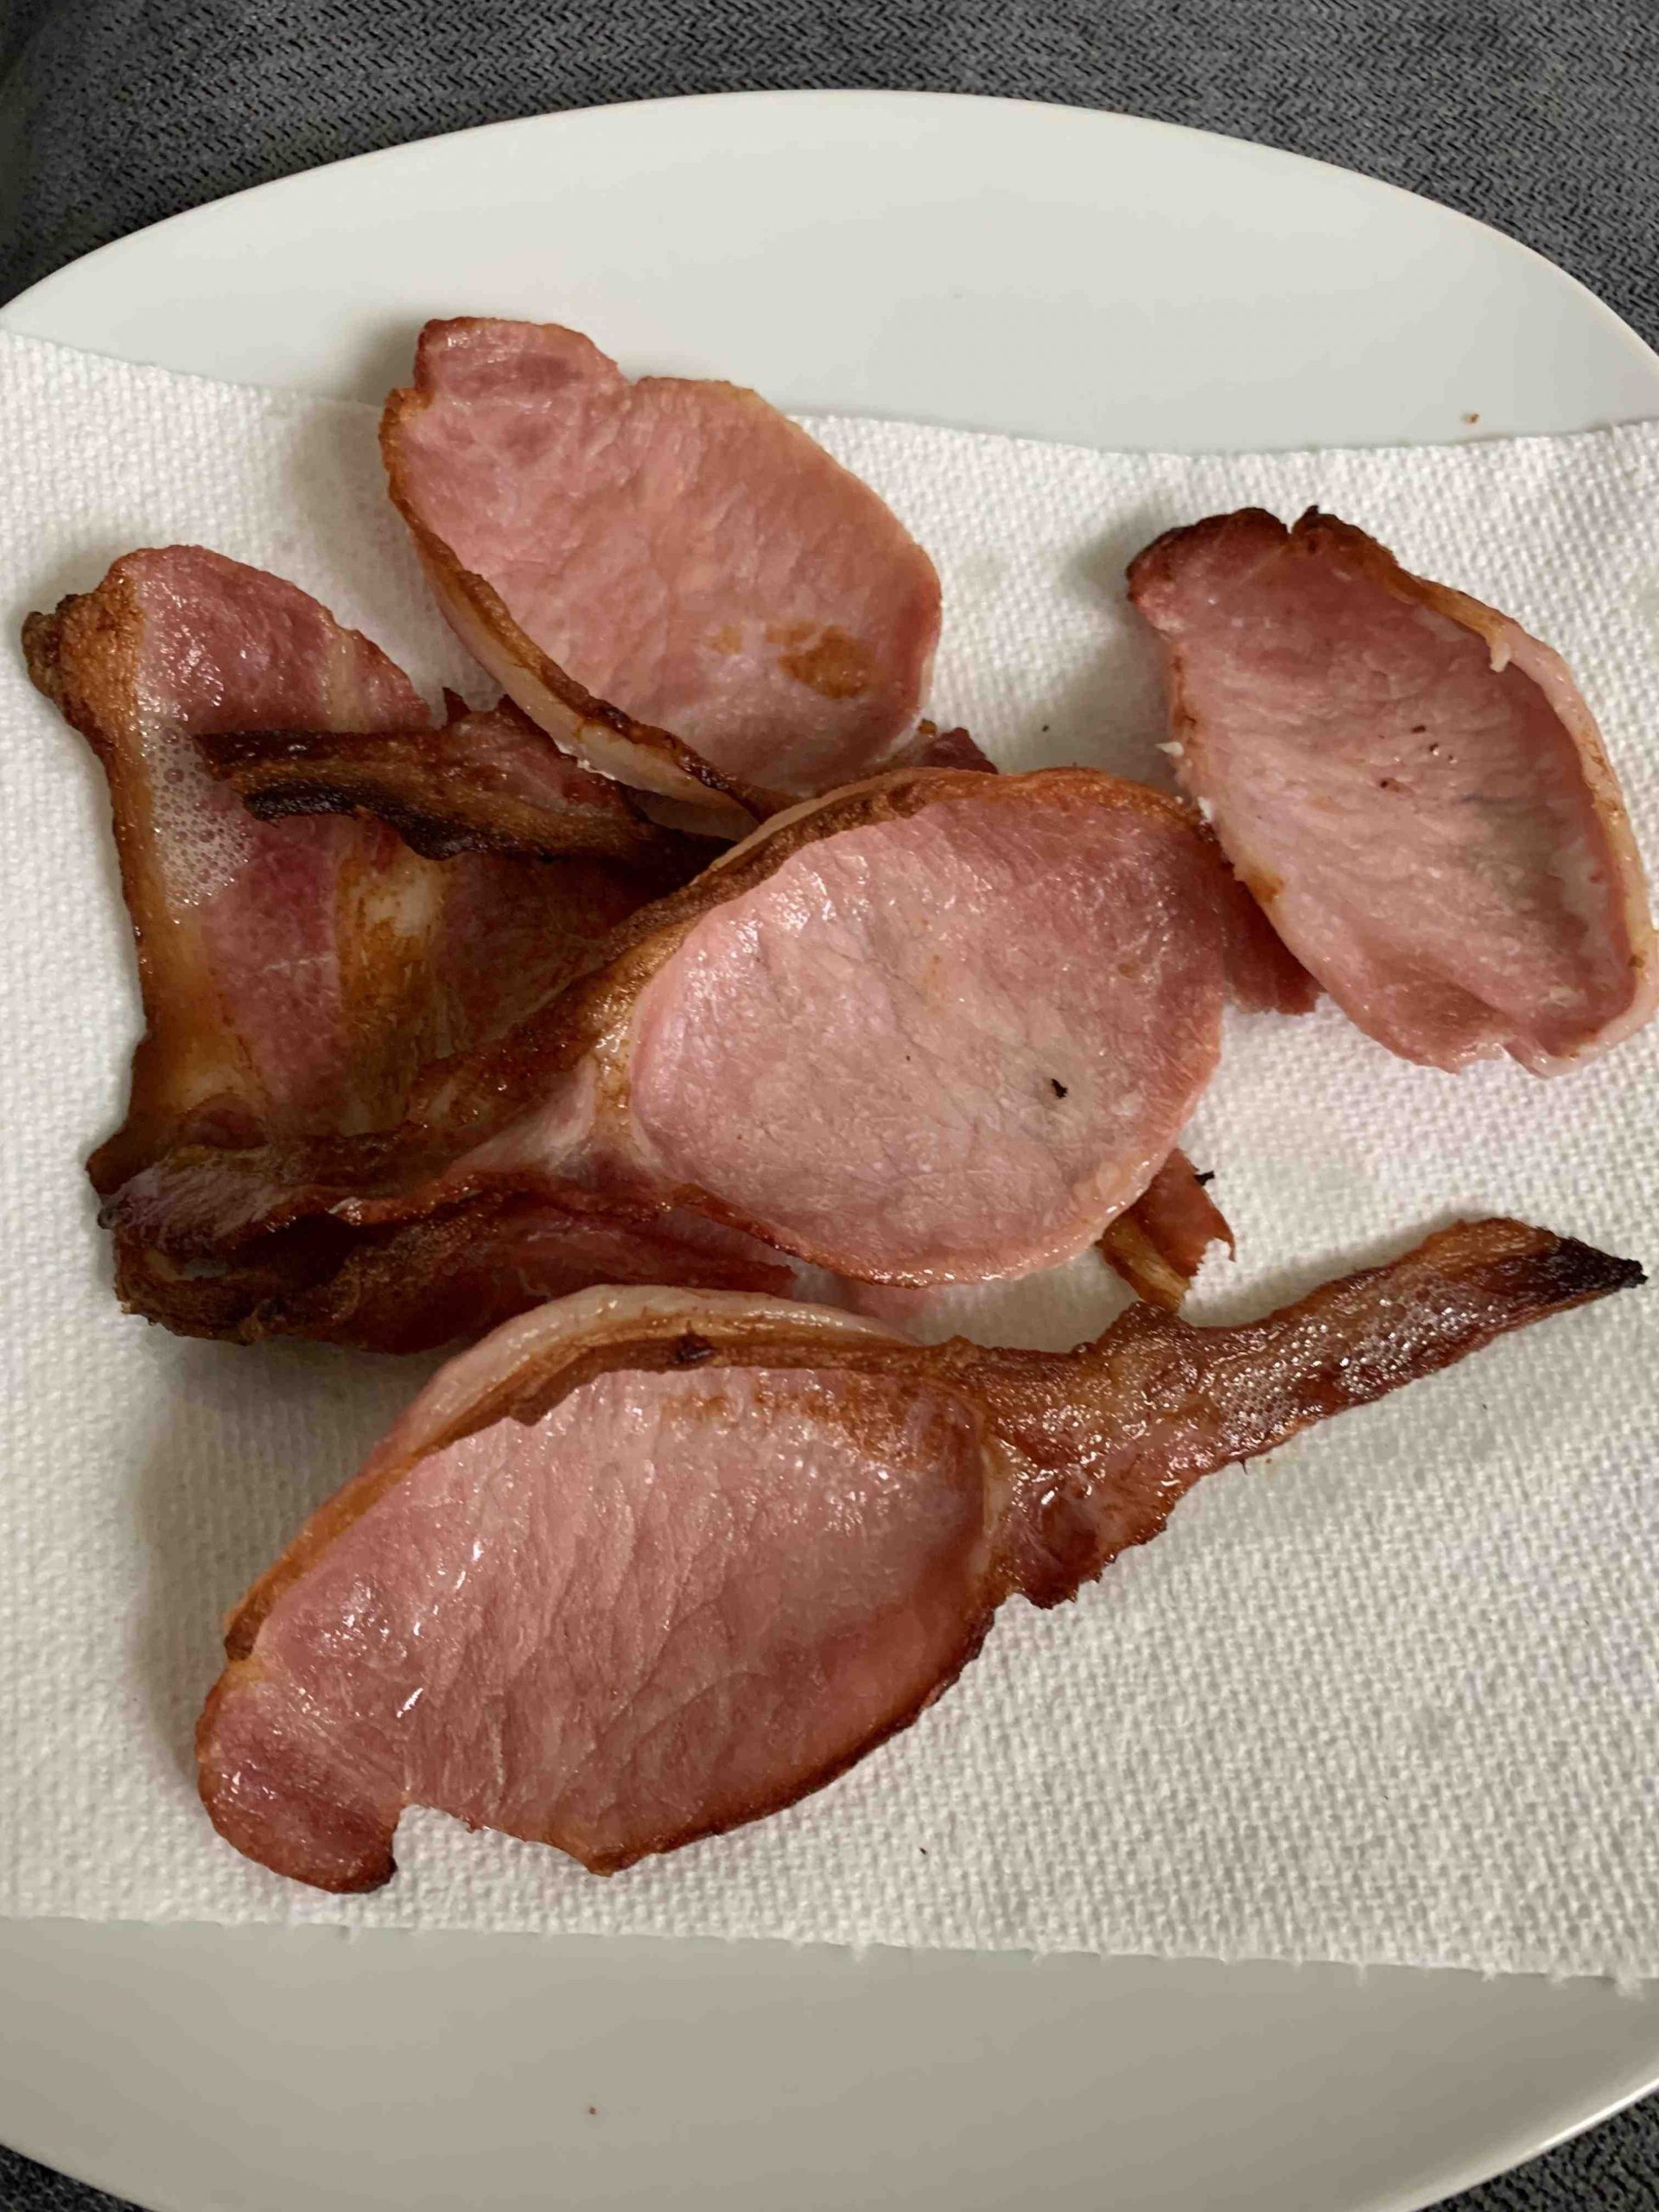 Is British bacon processed?